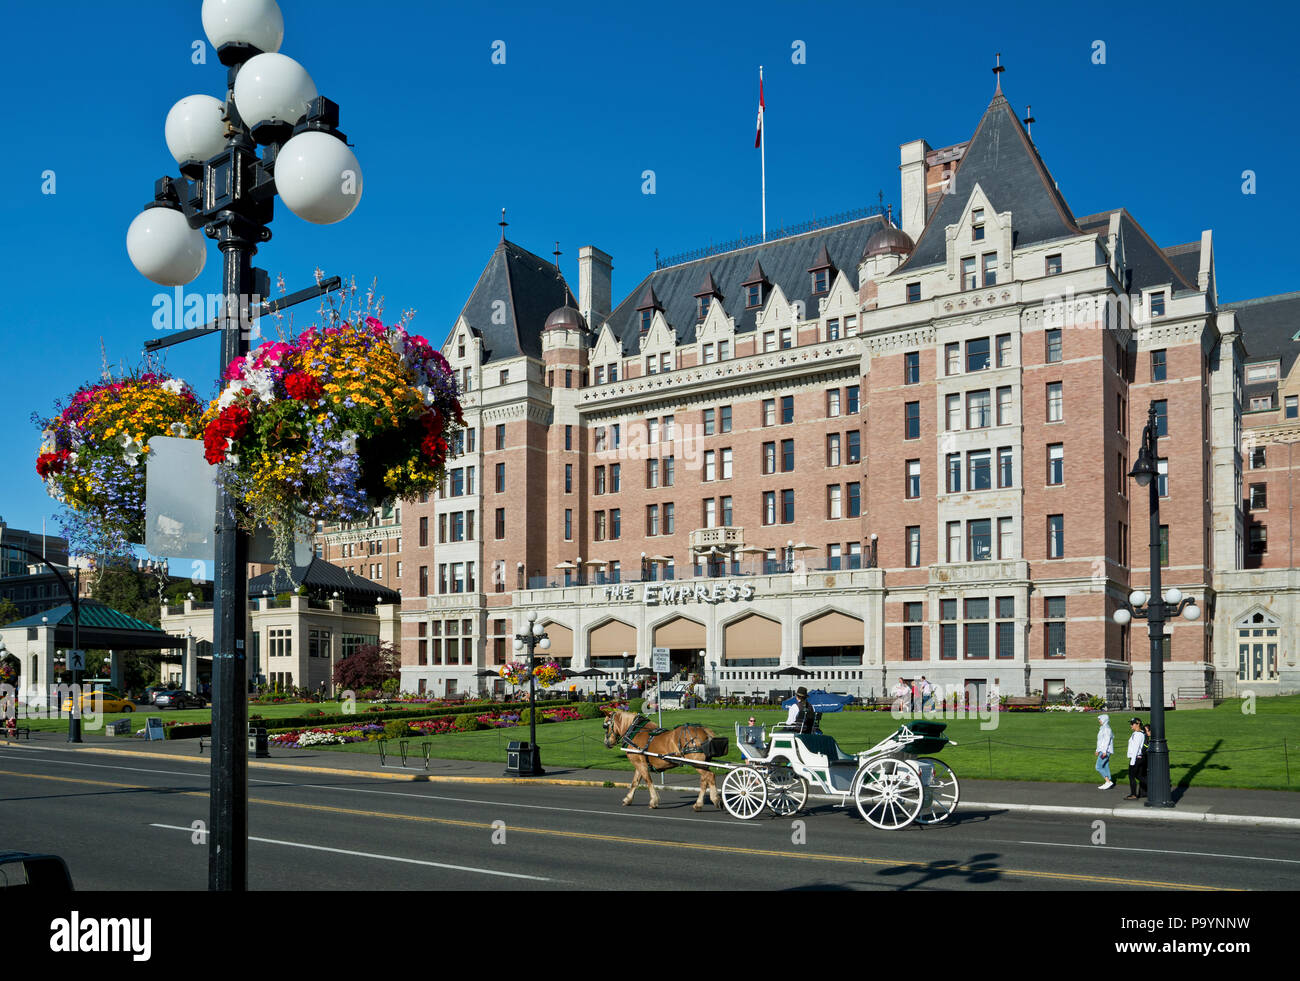 Fairmont Empress Hotel in Victoria, BC, Canada.  Victoria British Columbia Canada Empress Hotel with horse carriage in summer 2018. Stock Photo